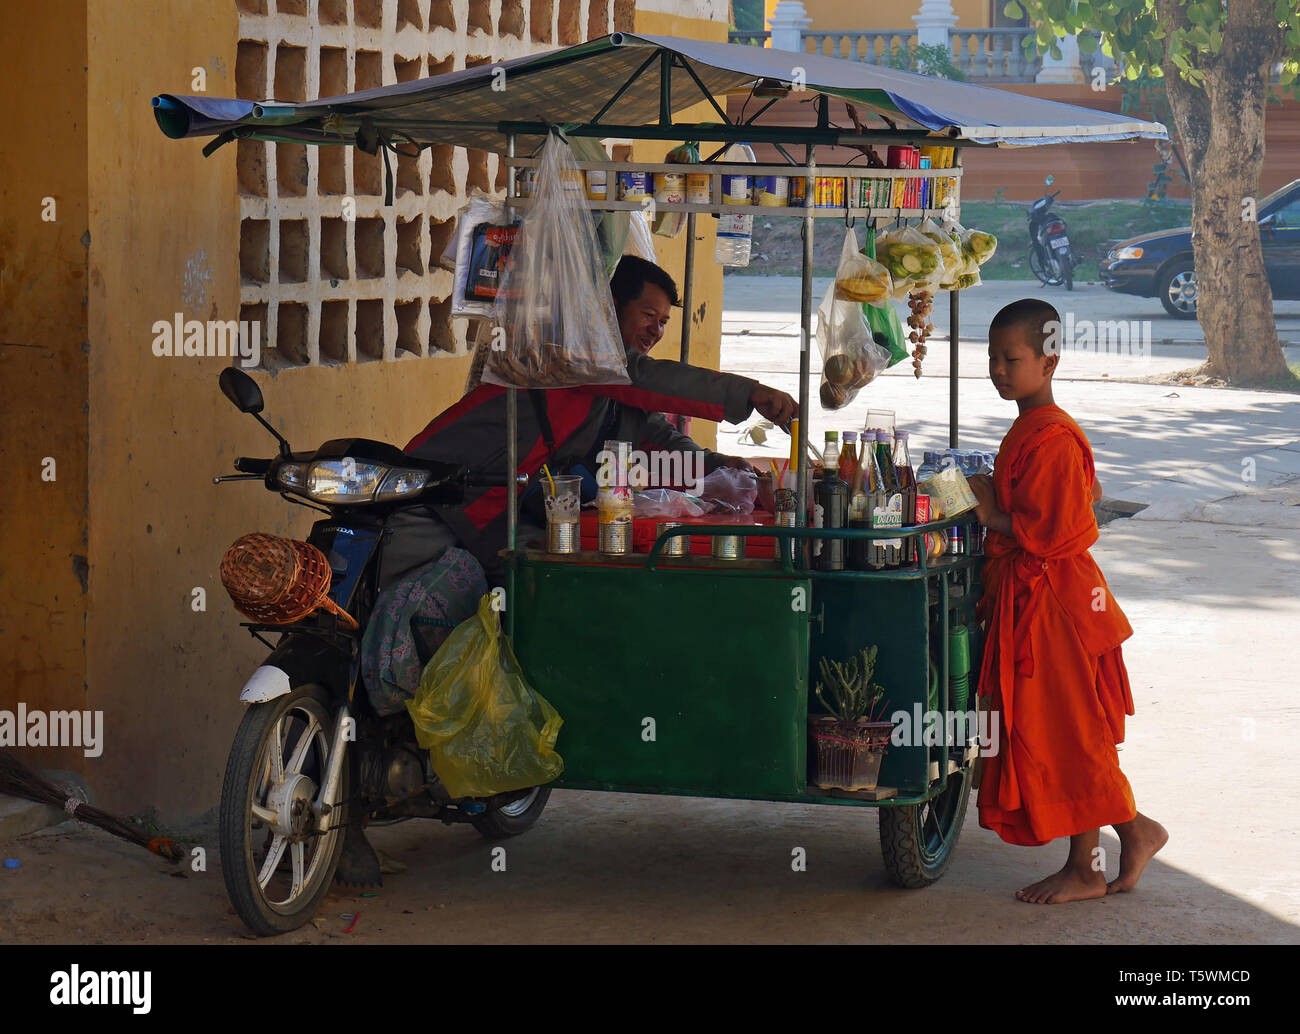 Outside the walls of Wat Kampong Thom a child monk buys a meal form a food vendor. Kampong Thom, Cambodia. 19-12-2018 Stock Photo